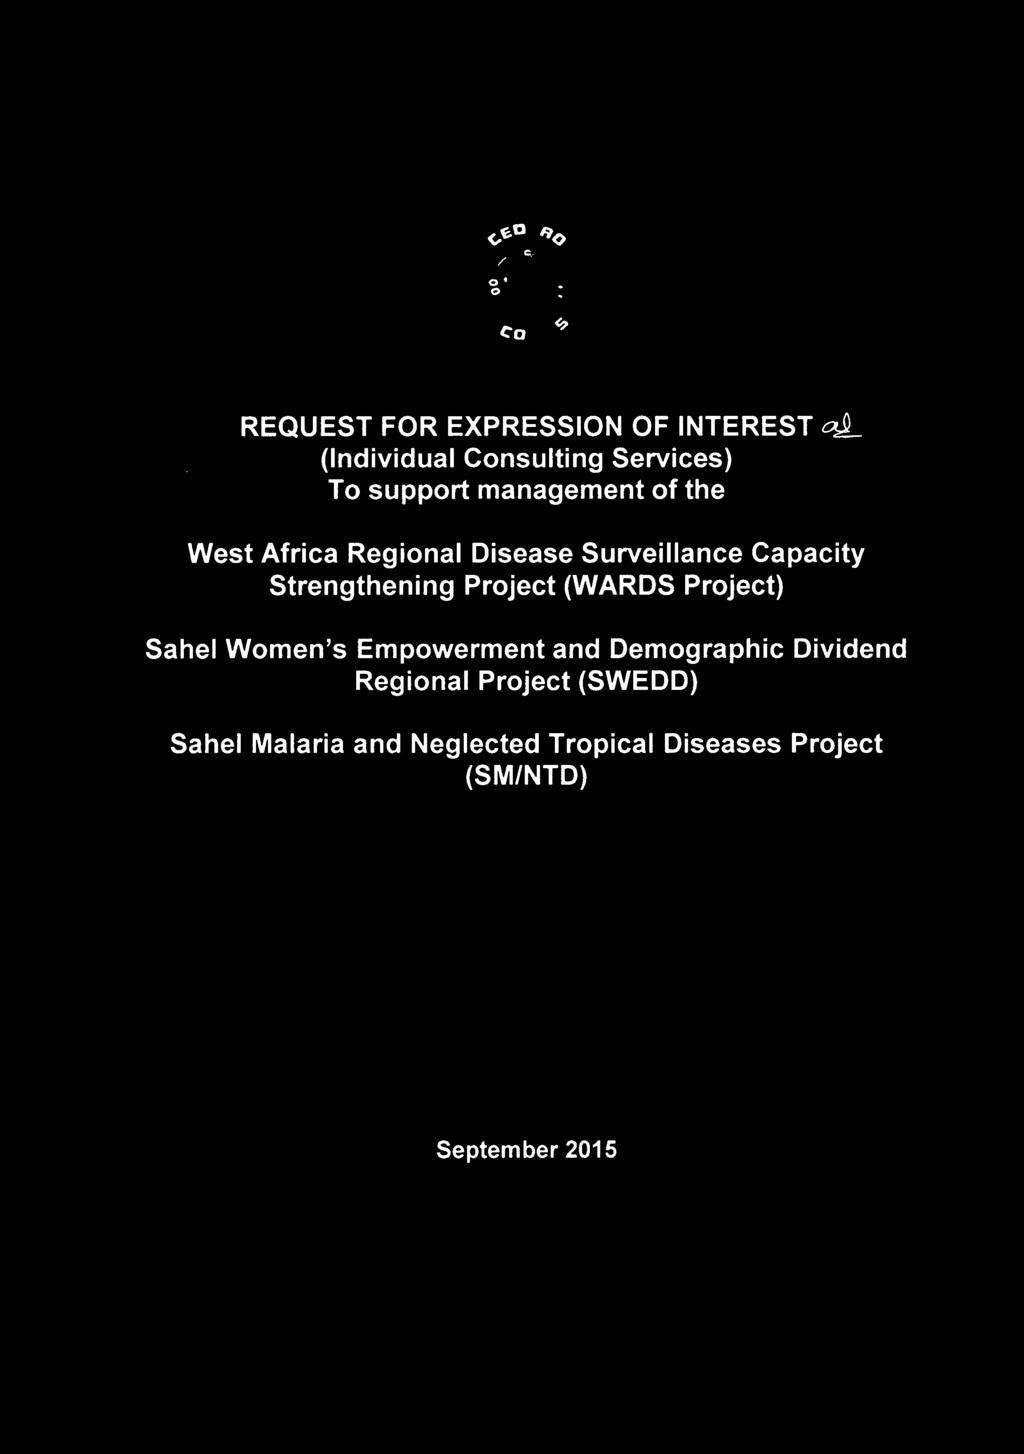 Project (WARDS Project) Sahel Women's Empowerment and Demographic Dividend Regional